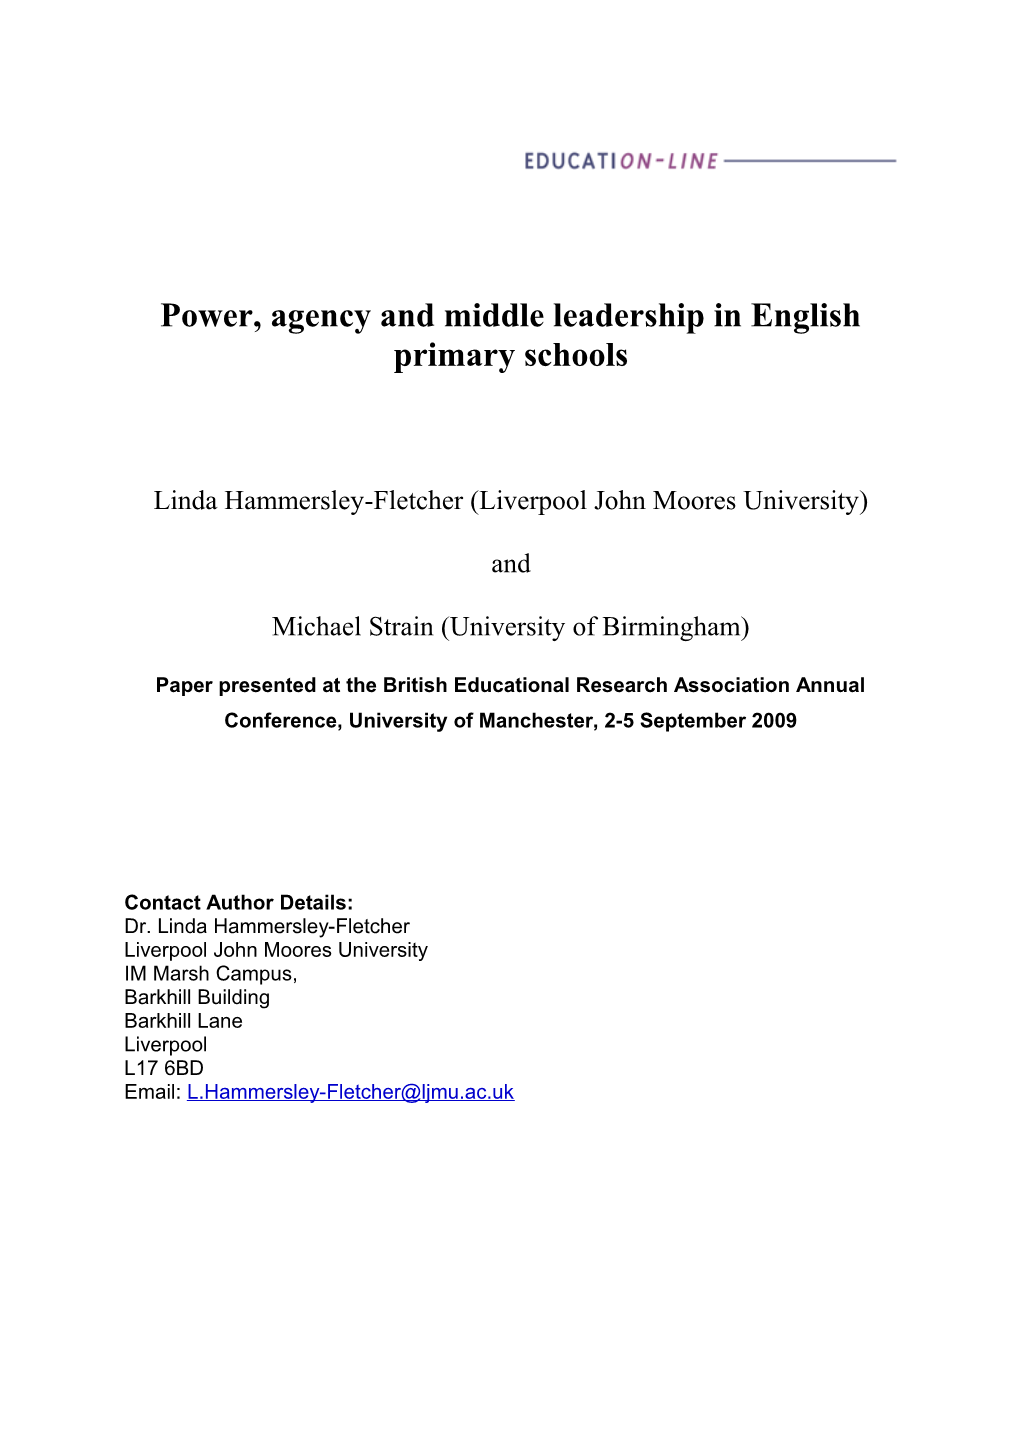 Power, Agency and Middle Leadership in English Primary Schools